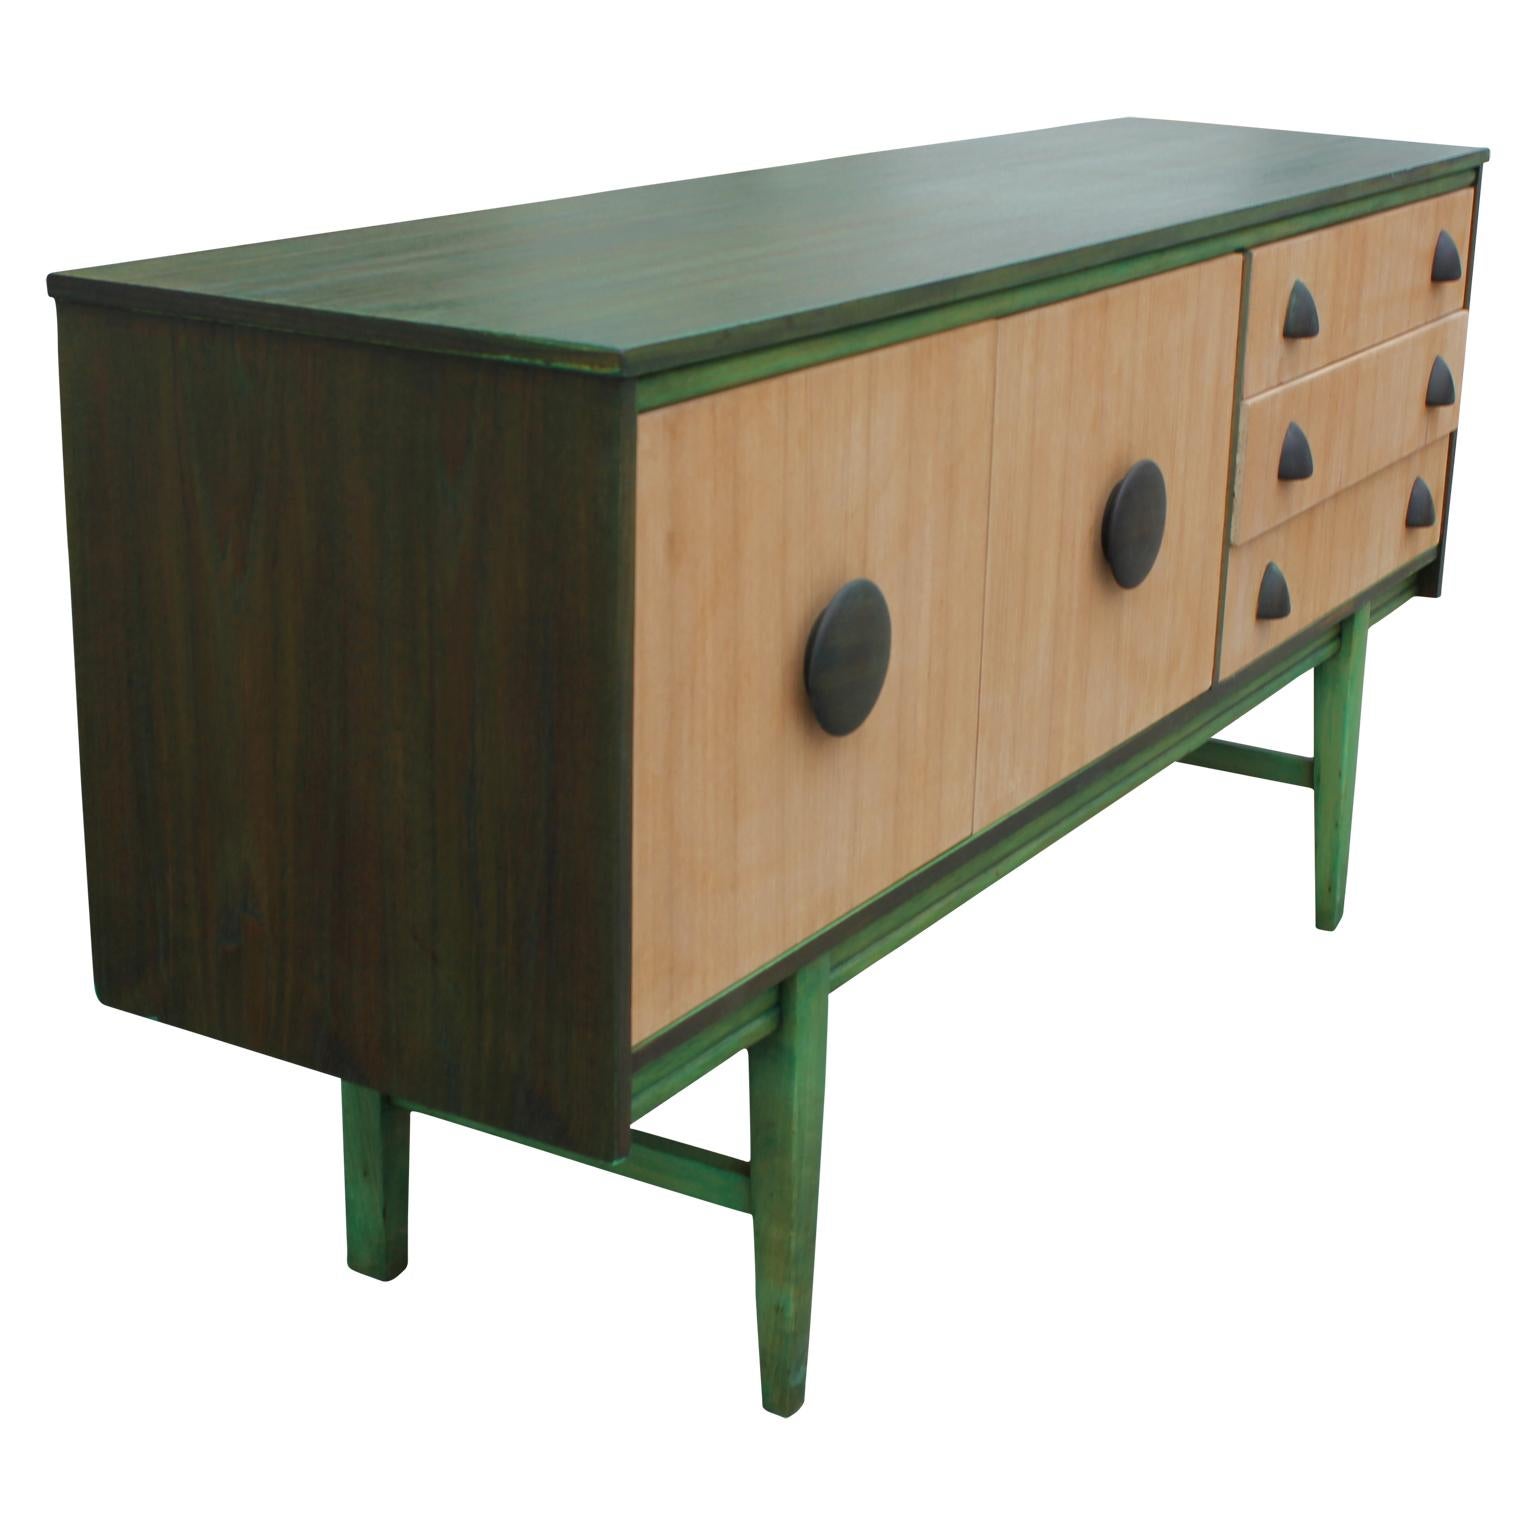 Wonderful modern custom restored Danish style sideboard or credenza. It has a newly completed green dyed finish and wooden handles. This credenza has three drawers and two cabinet doors with one interior shelf.